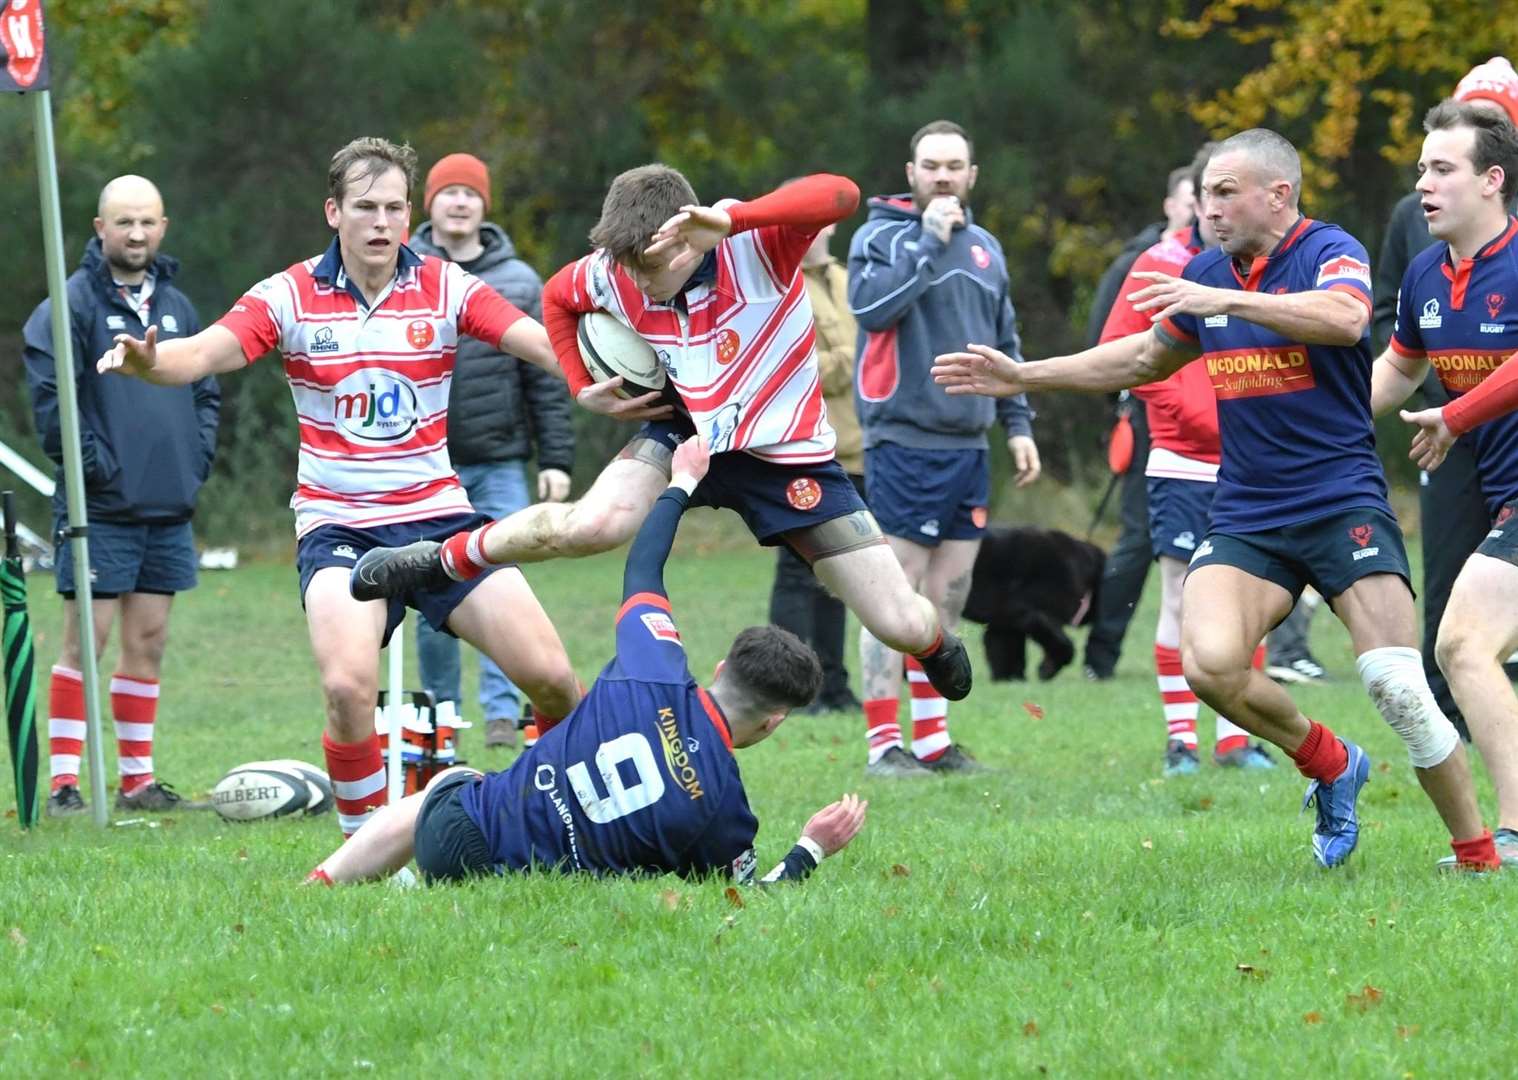 Ross Arnott tries to hurdle tackling scrum-half, with Cameron Ireland in the background. Photo: James Officer